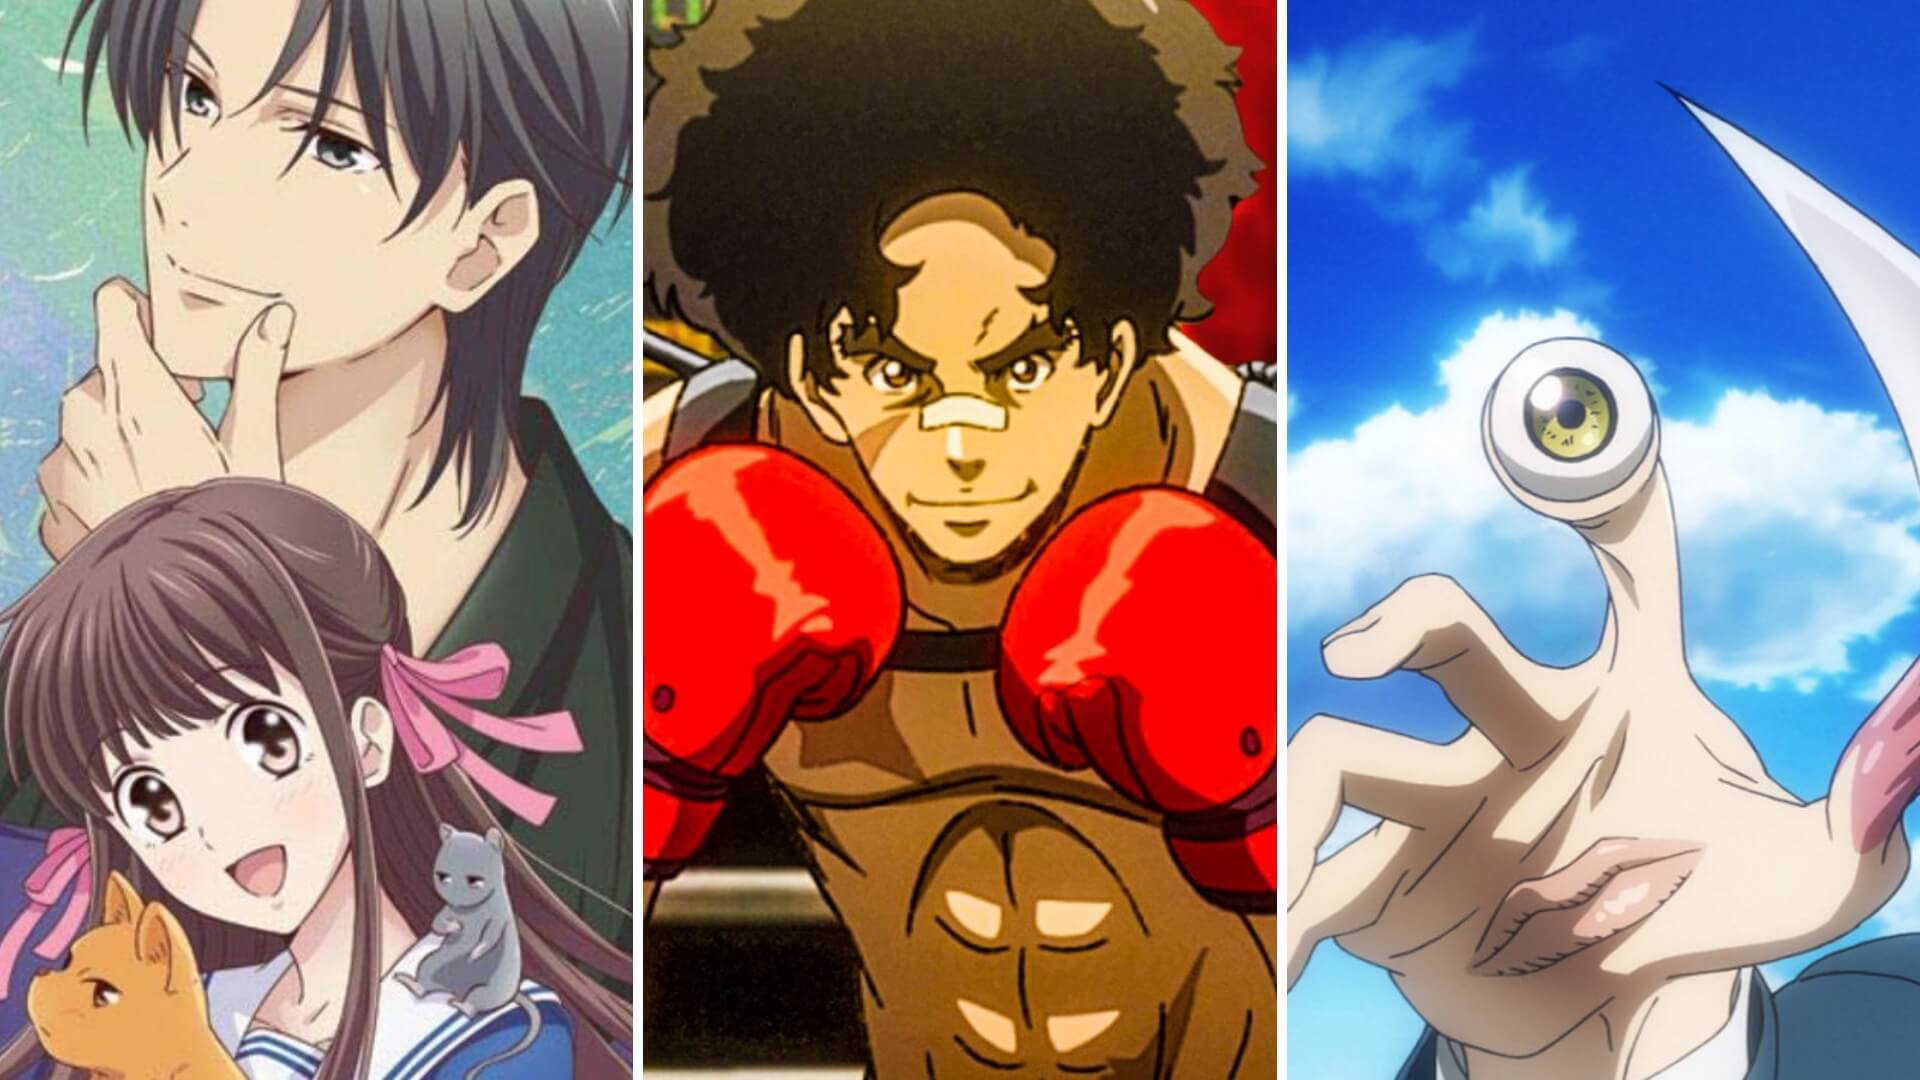 Best Hulu Anime: 10 Hulu Anime Series You Should Stream Right Now